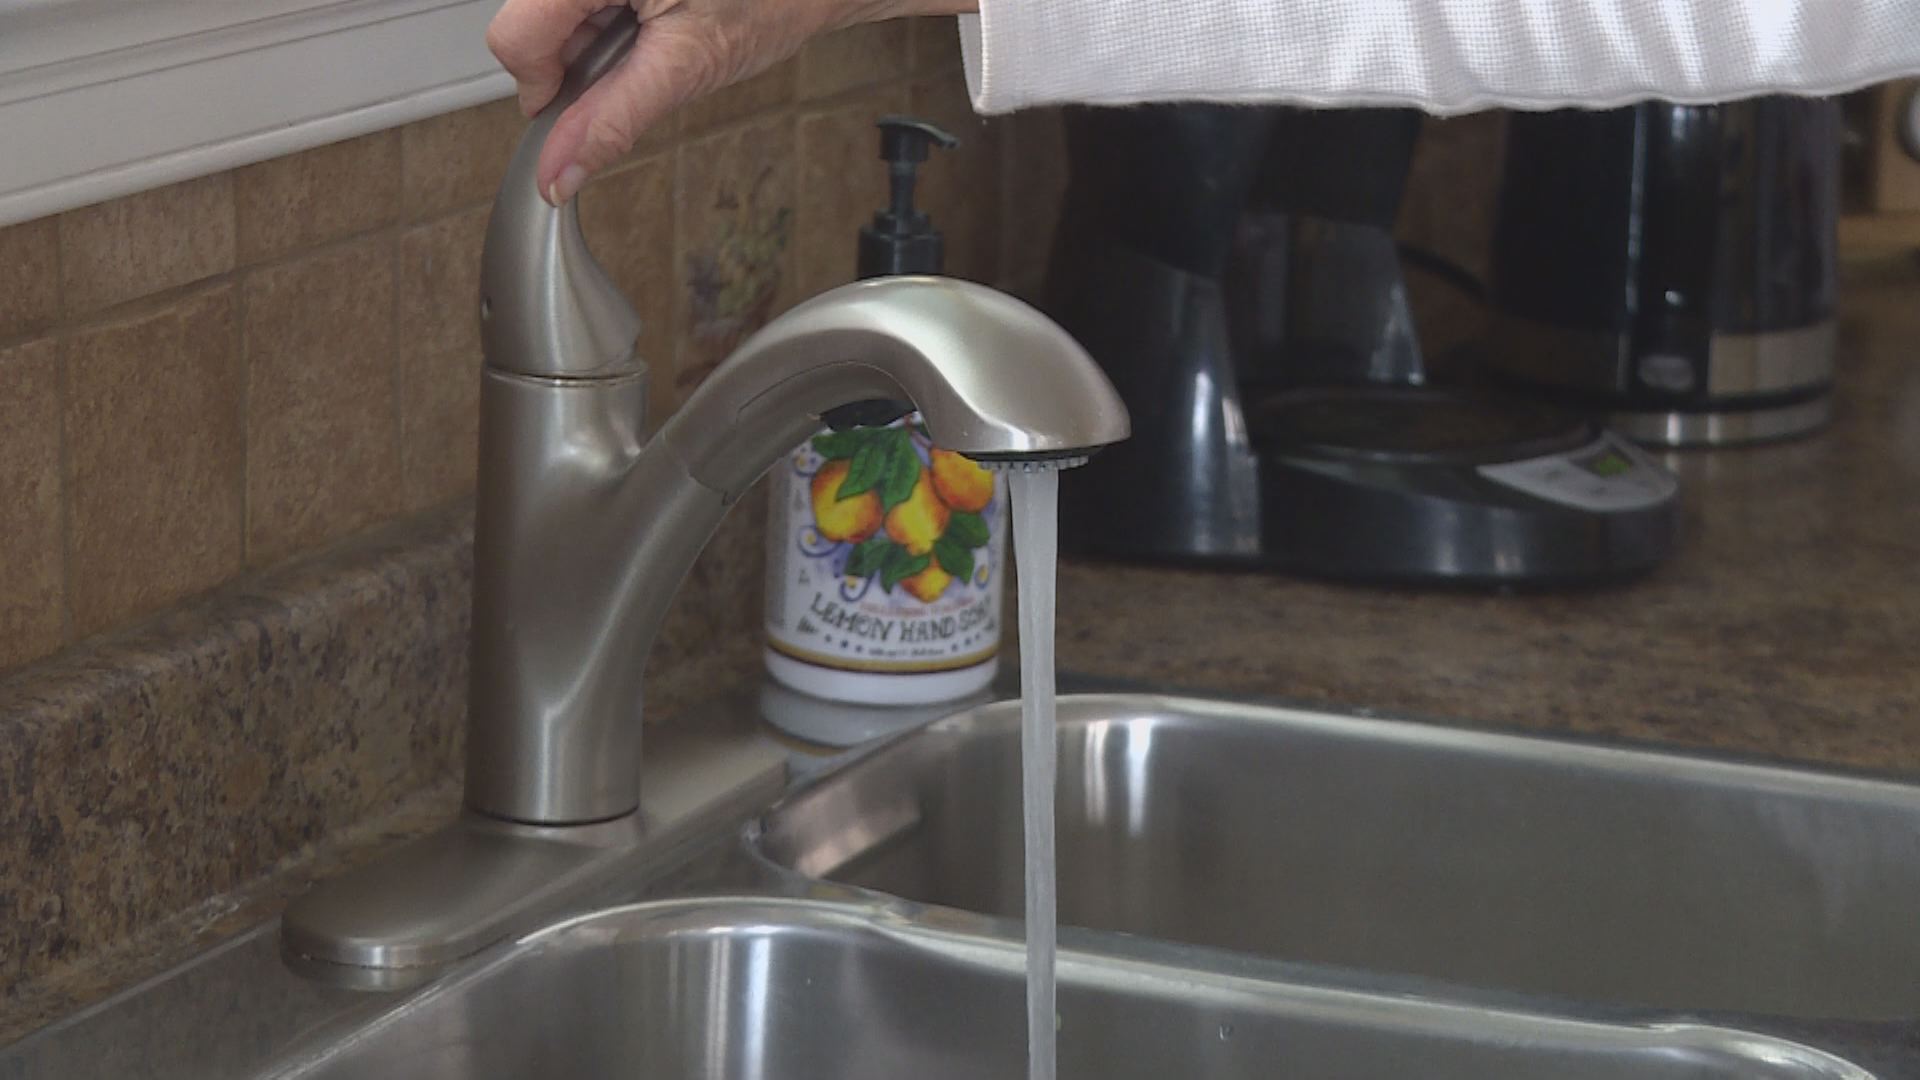 23,000 Kelowna water customers to benefit from new agreement